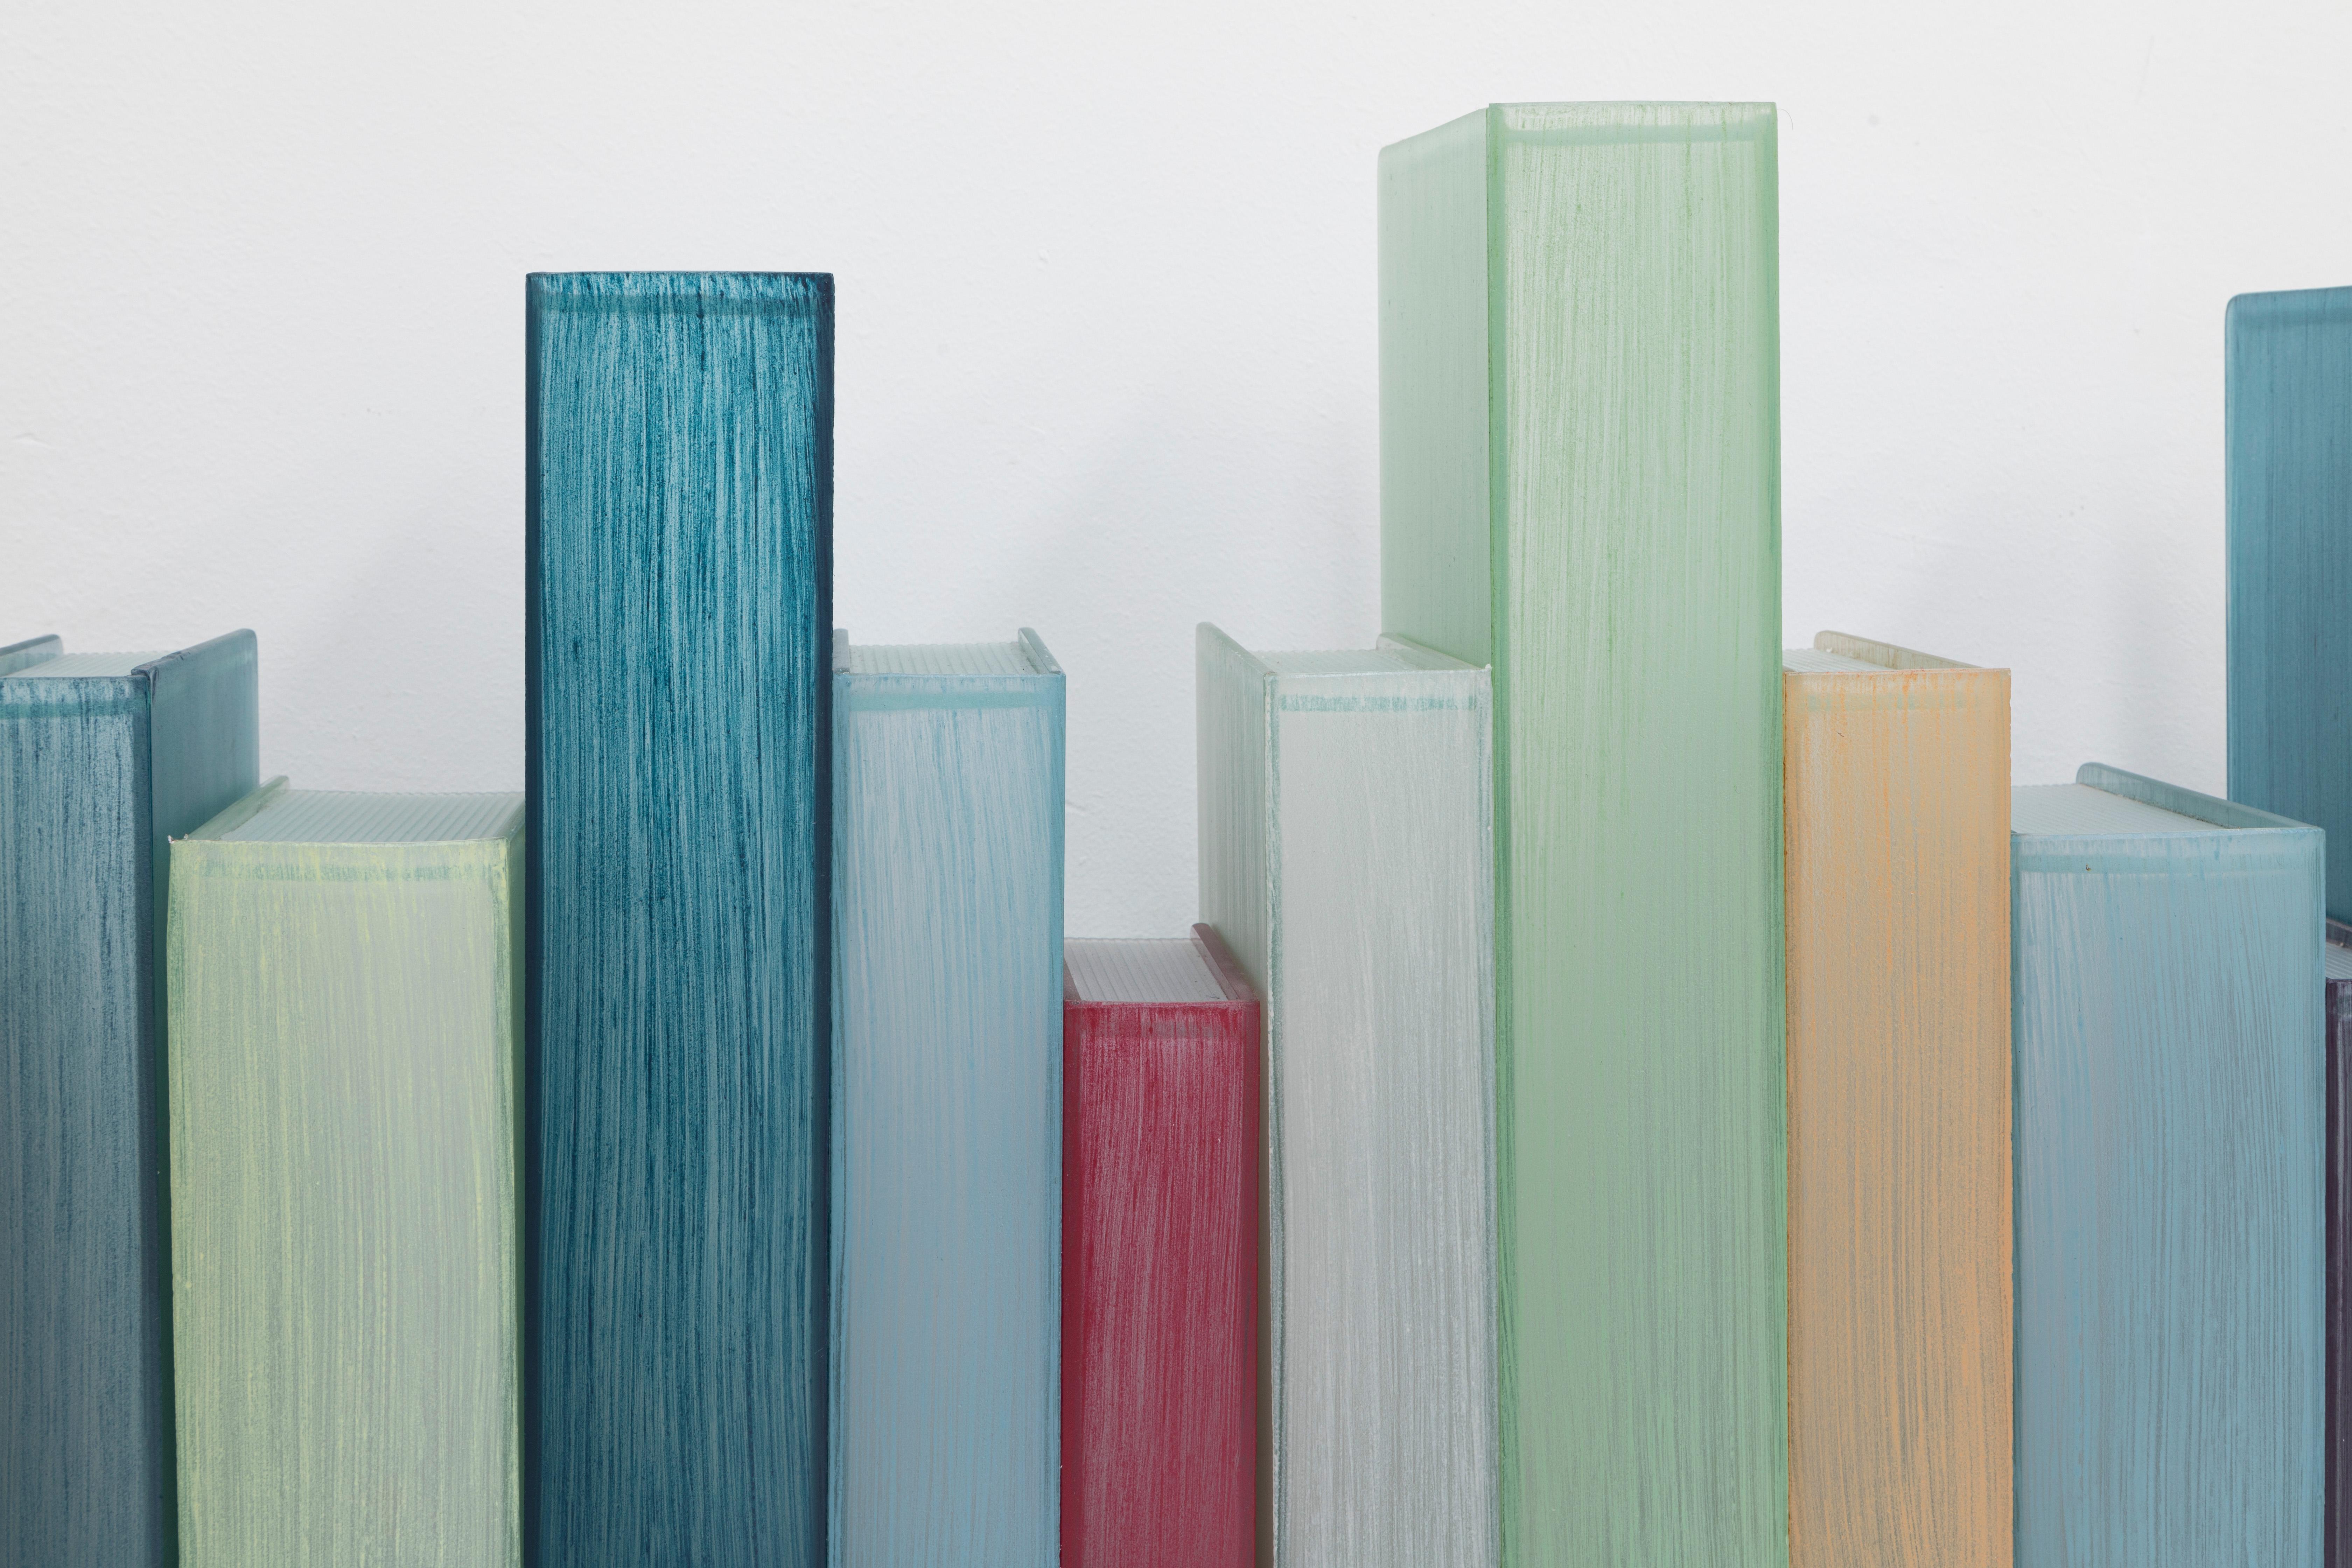 Chiara Dynys, Enlightening Books, 2011 - 2021, sculpture, glass, colours, light  - Gray Abstract Sculpture by Chiara Dynys 